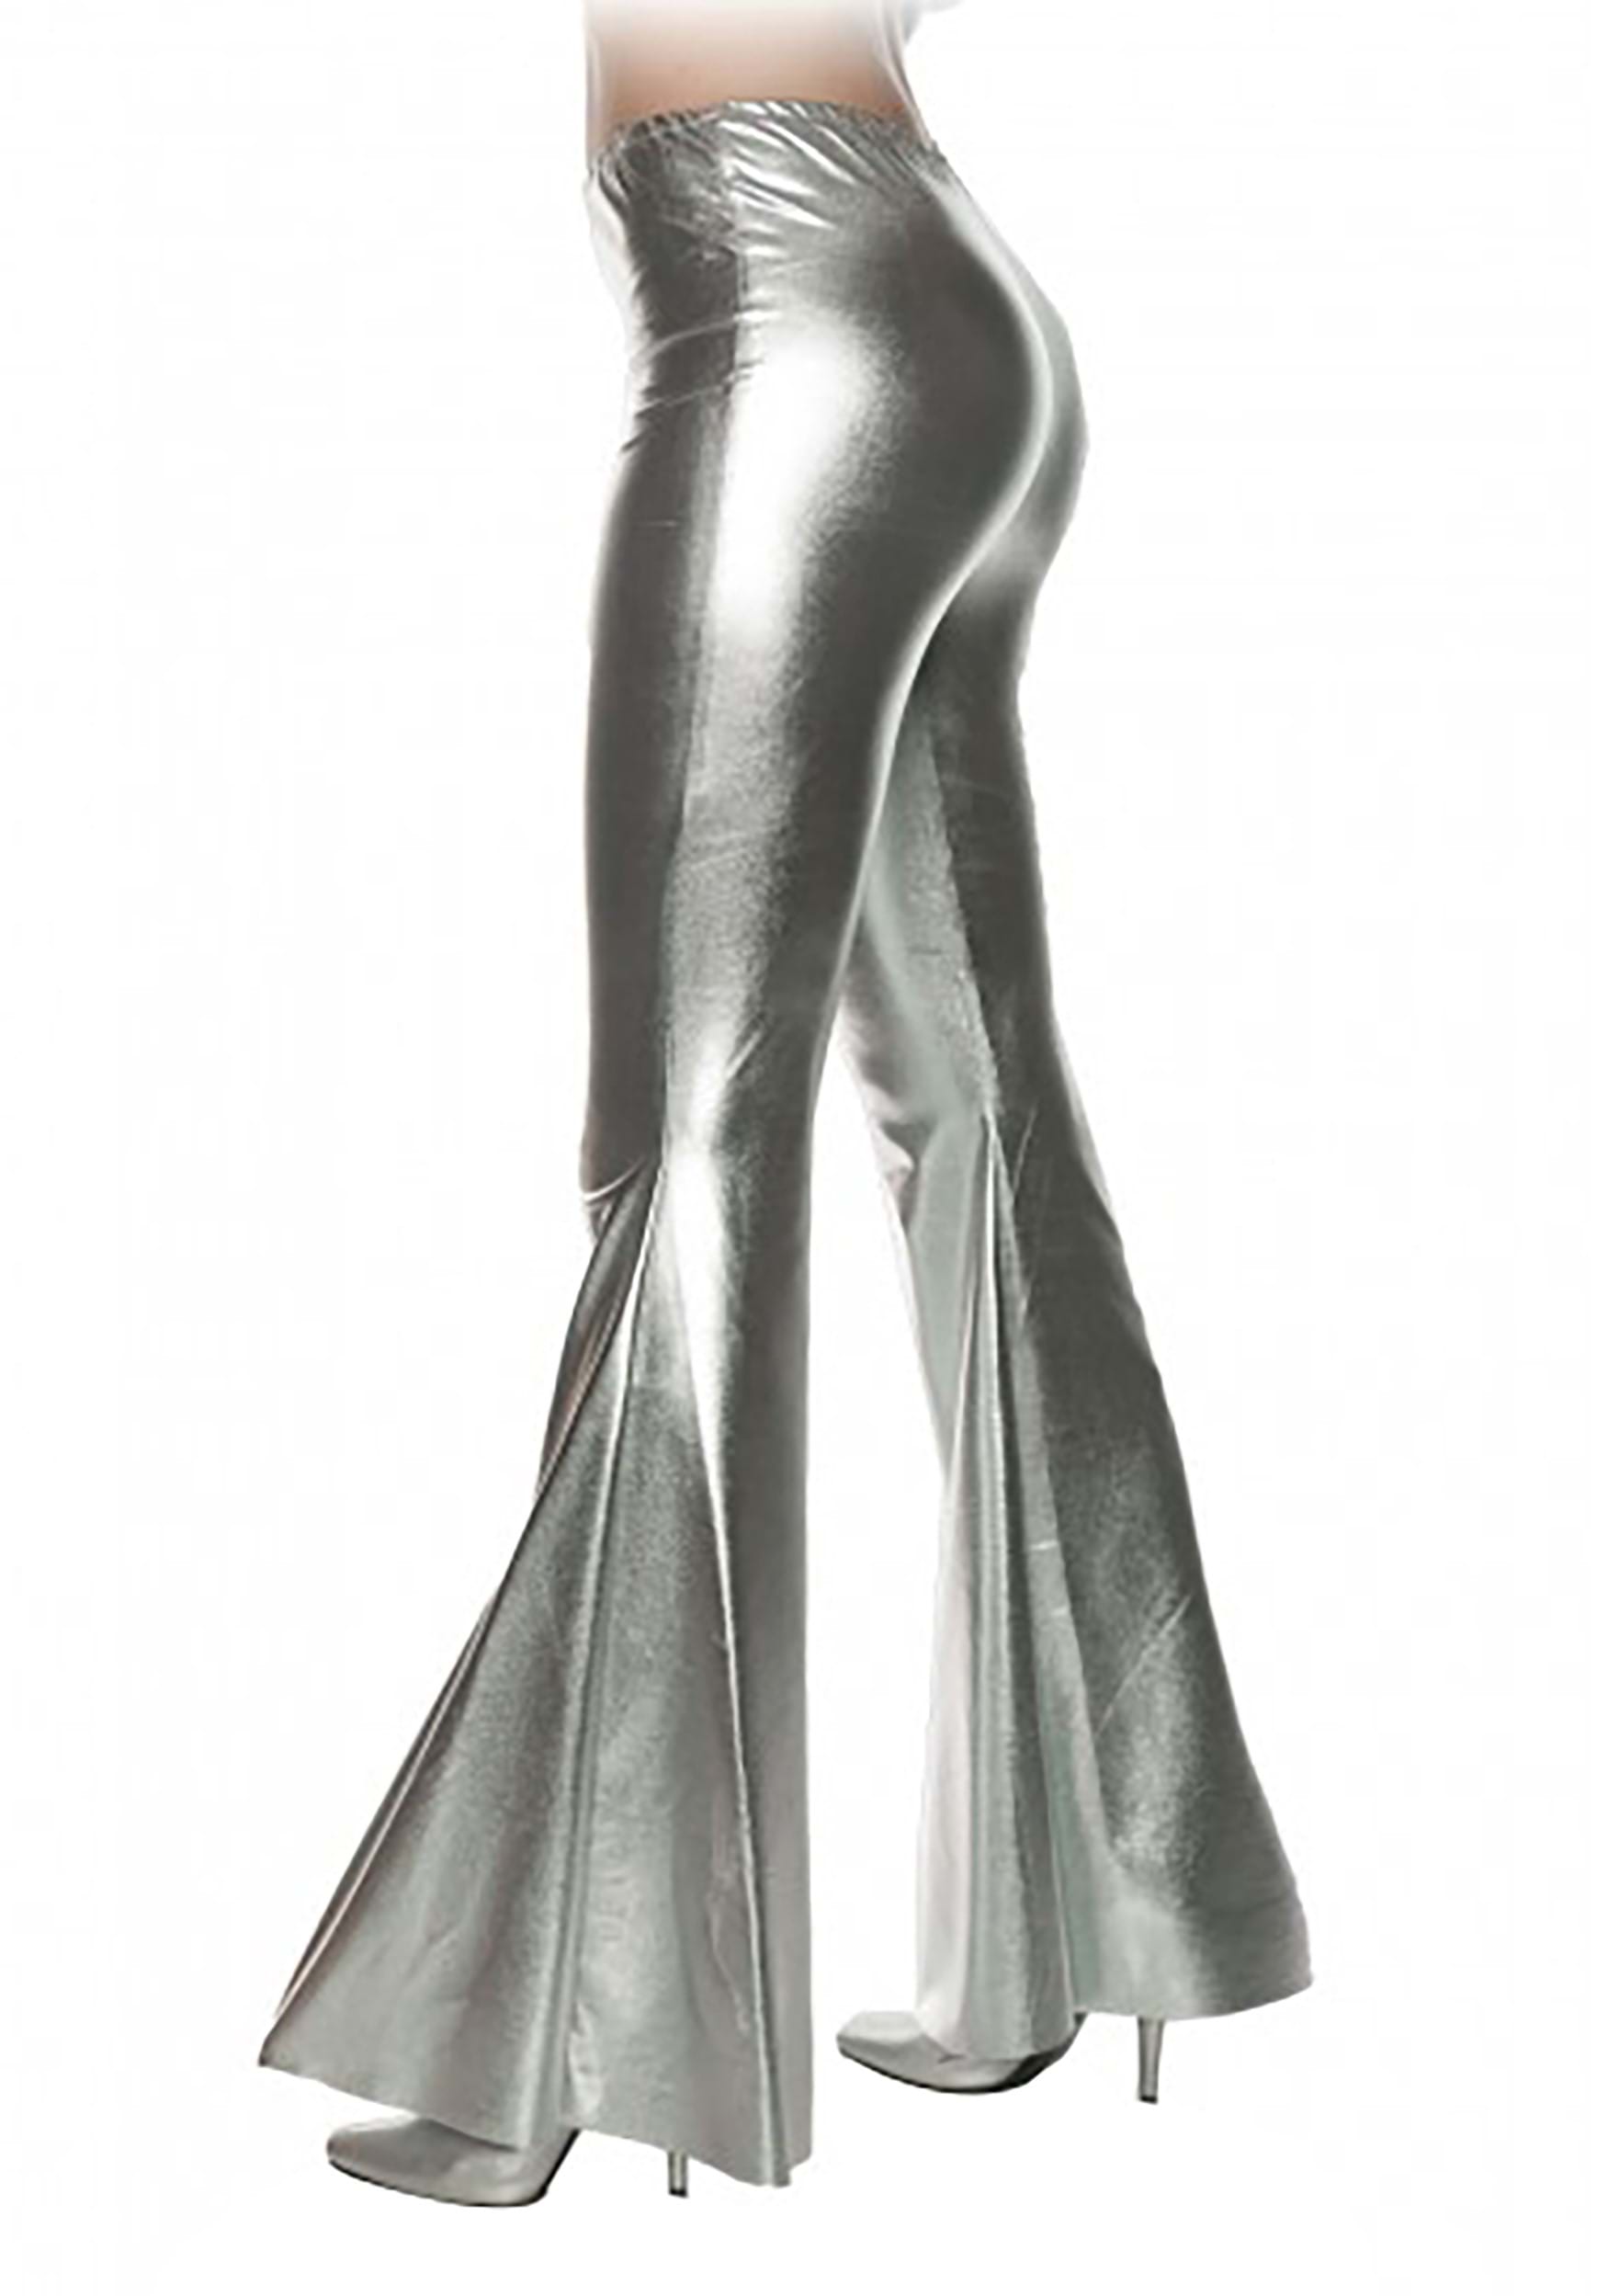 https://images.halloweencostumes.ca/products/84580/1-1/womens-metallic-silver-bell-bottoms.jpg